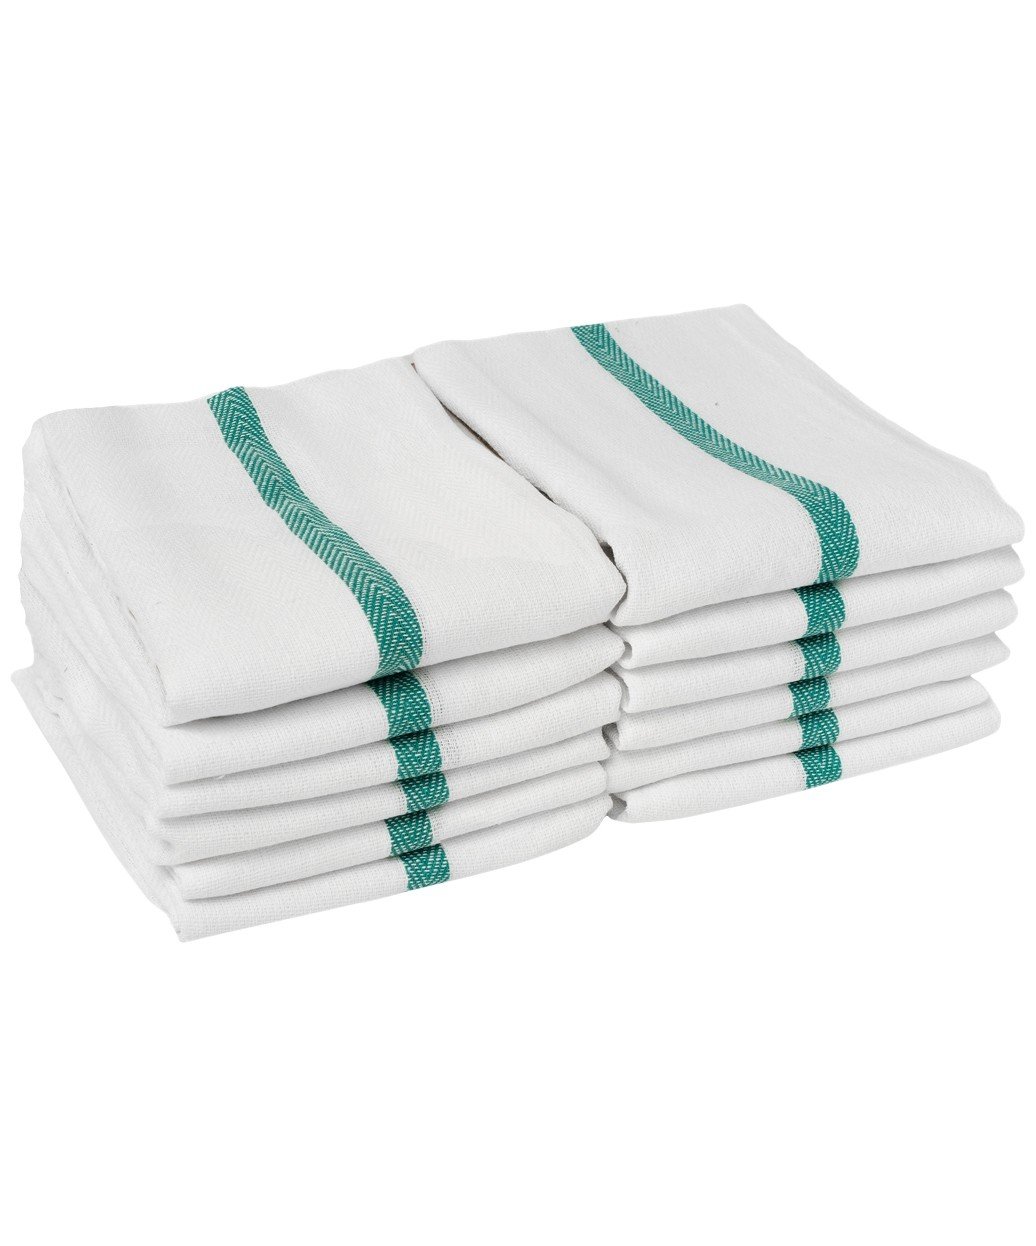 12 Pack White Barber Towels from Buy-Rite Beauty